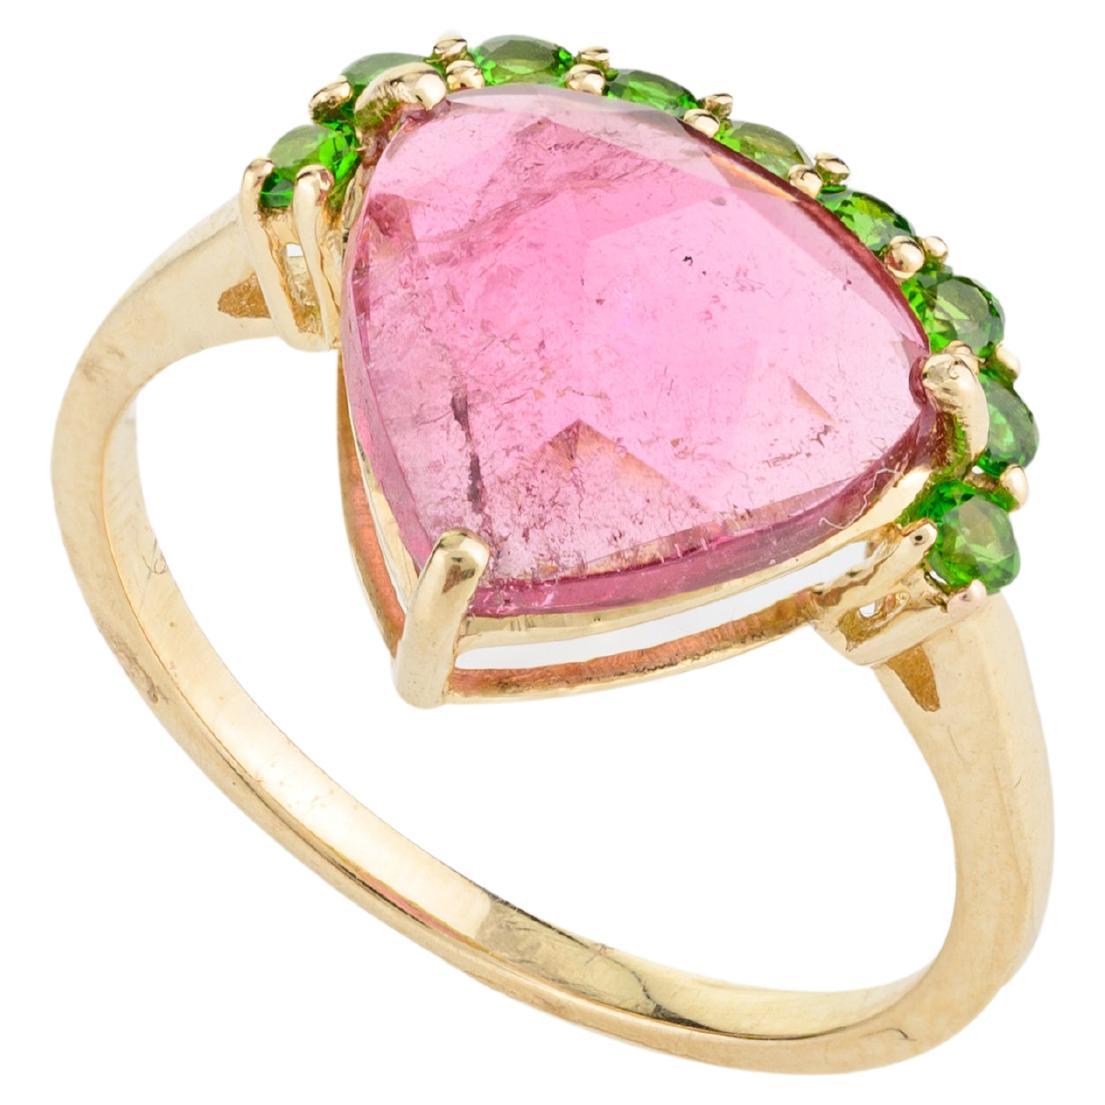 For Sale:  Natural Semi Precious Multi Gemstone Wedding Ring in 14k Solid Yellow Gold